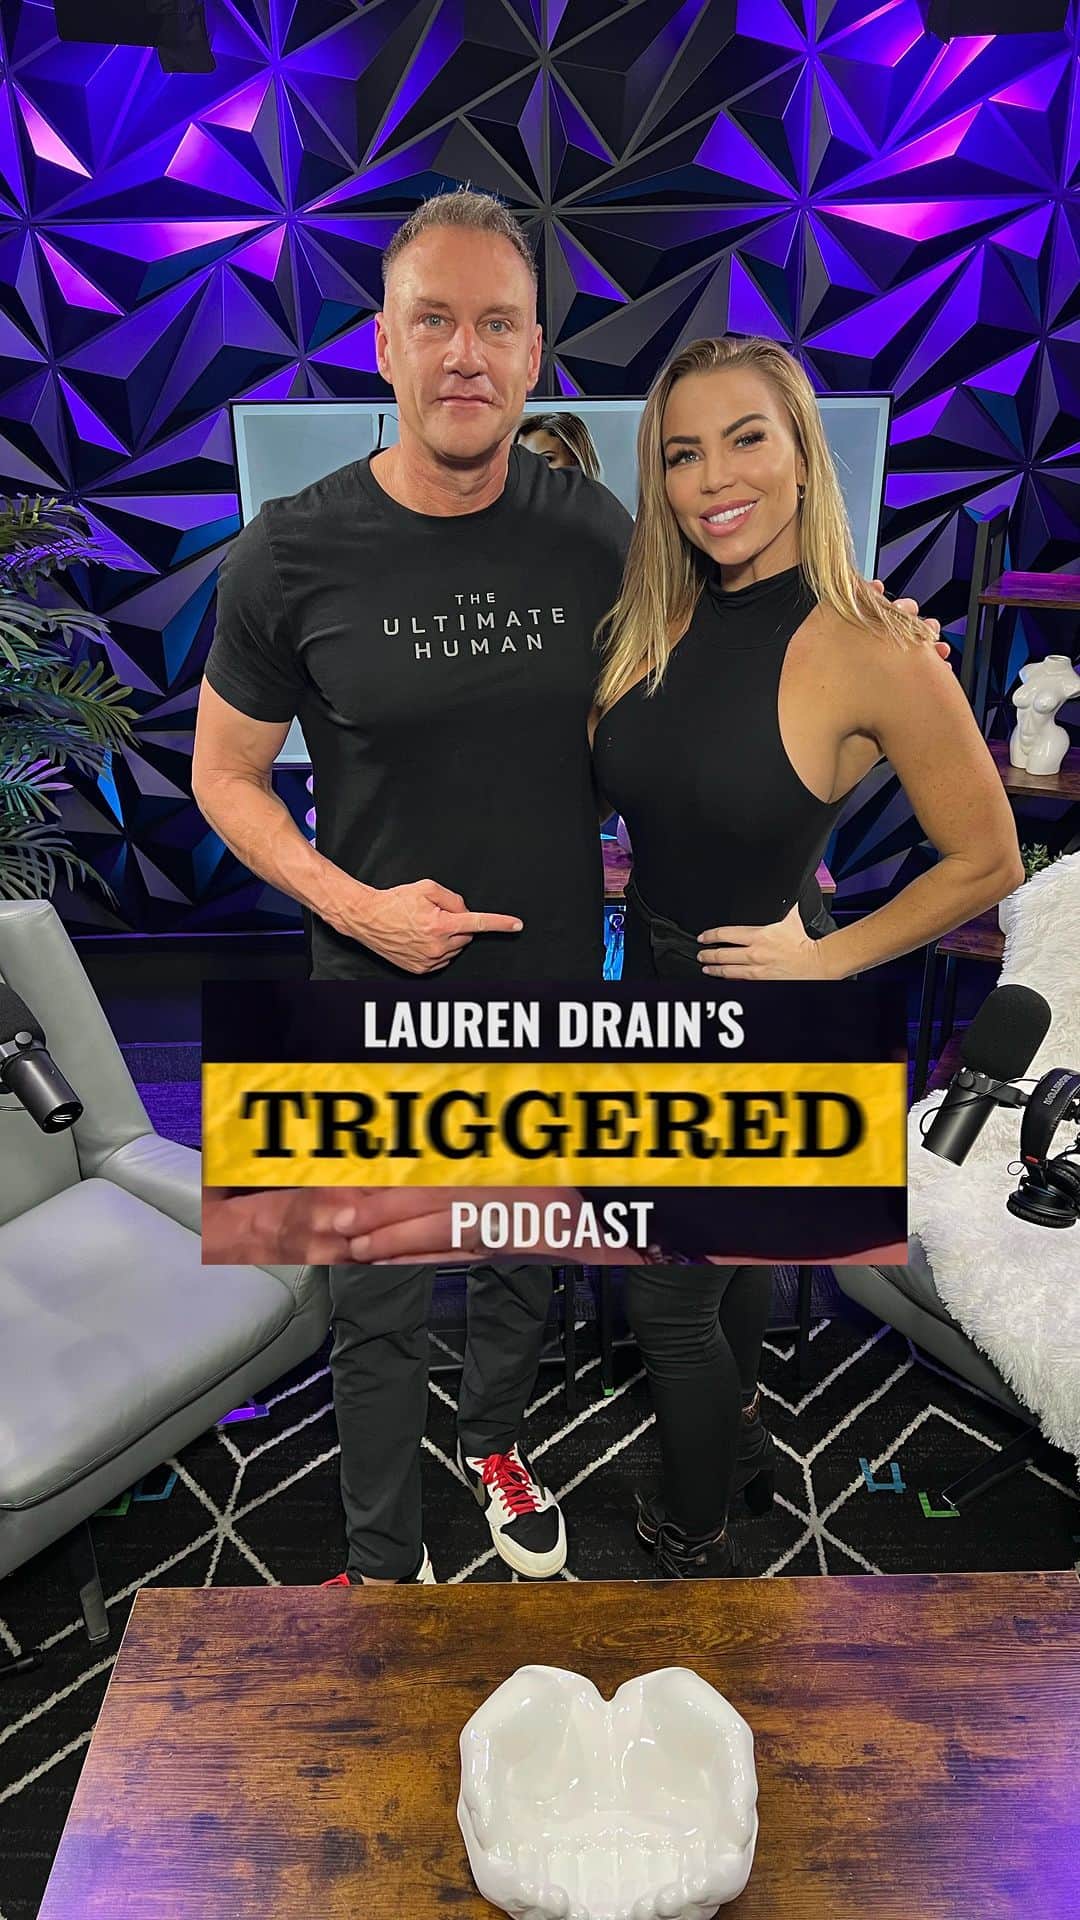 Lauren Drain Kaganのインスタグラム：「RE-POSTING PODCAST TRIGGERED with HUMAN BIOLOGIST and health expert @garybrecka who explains ADHD, POSTPARTUM depression, and many other physical and mental health disorders are simply genetic mutations that can be corrected with simple VITAMIN SUPPLEMENTATION. See my IG STORIES for link to listen and watch his expert advice on weight loss, getting off meds and healing from many diseases naturally! #podcaster #podcastersofinstagram #laurendrainfit #triggeredpodcast」